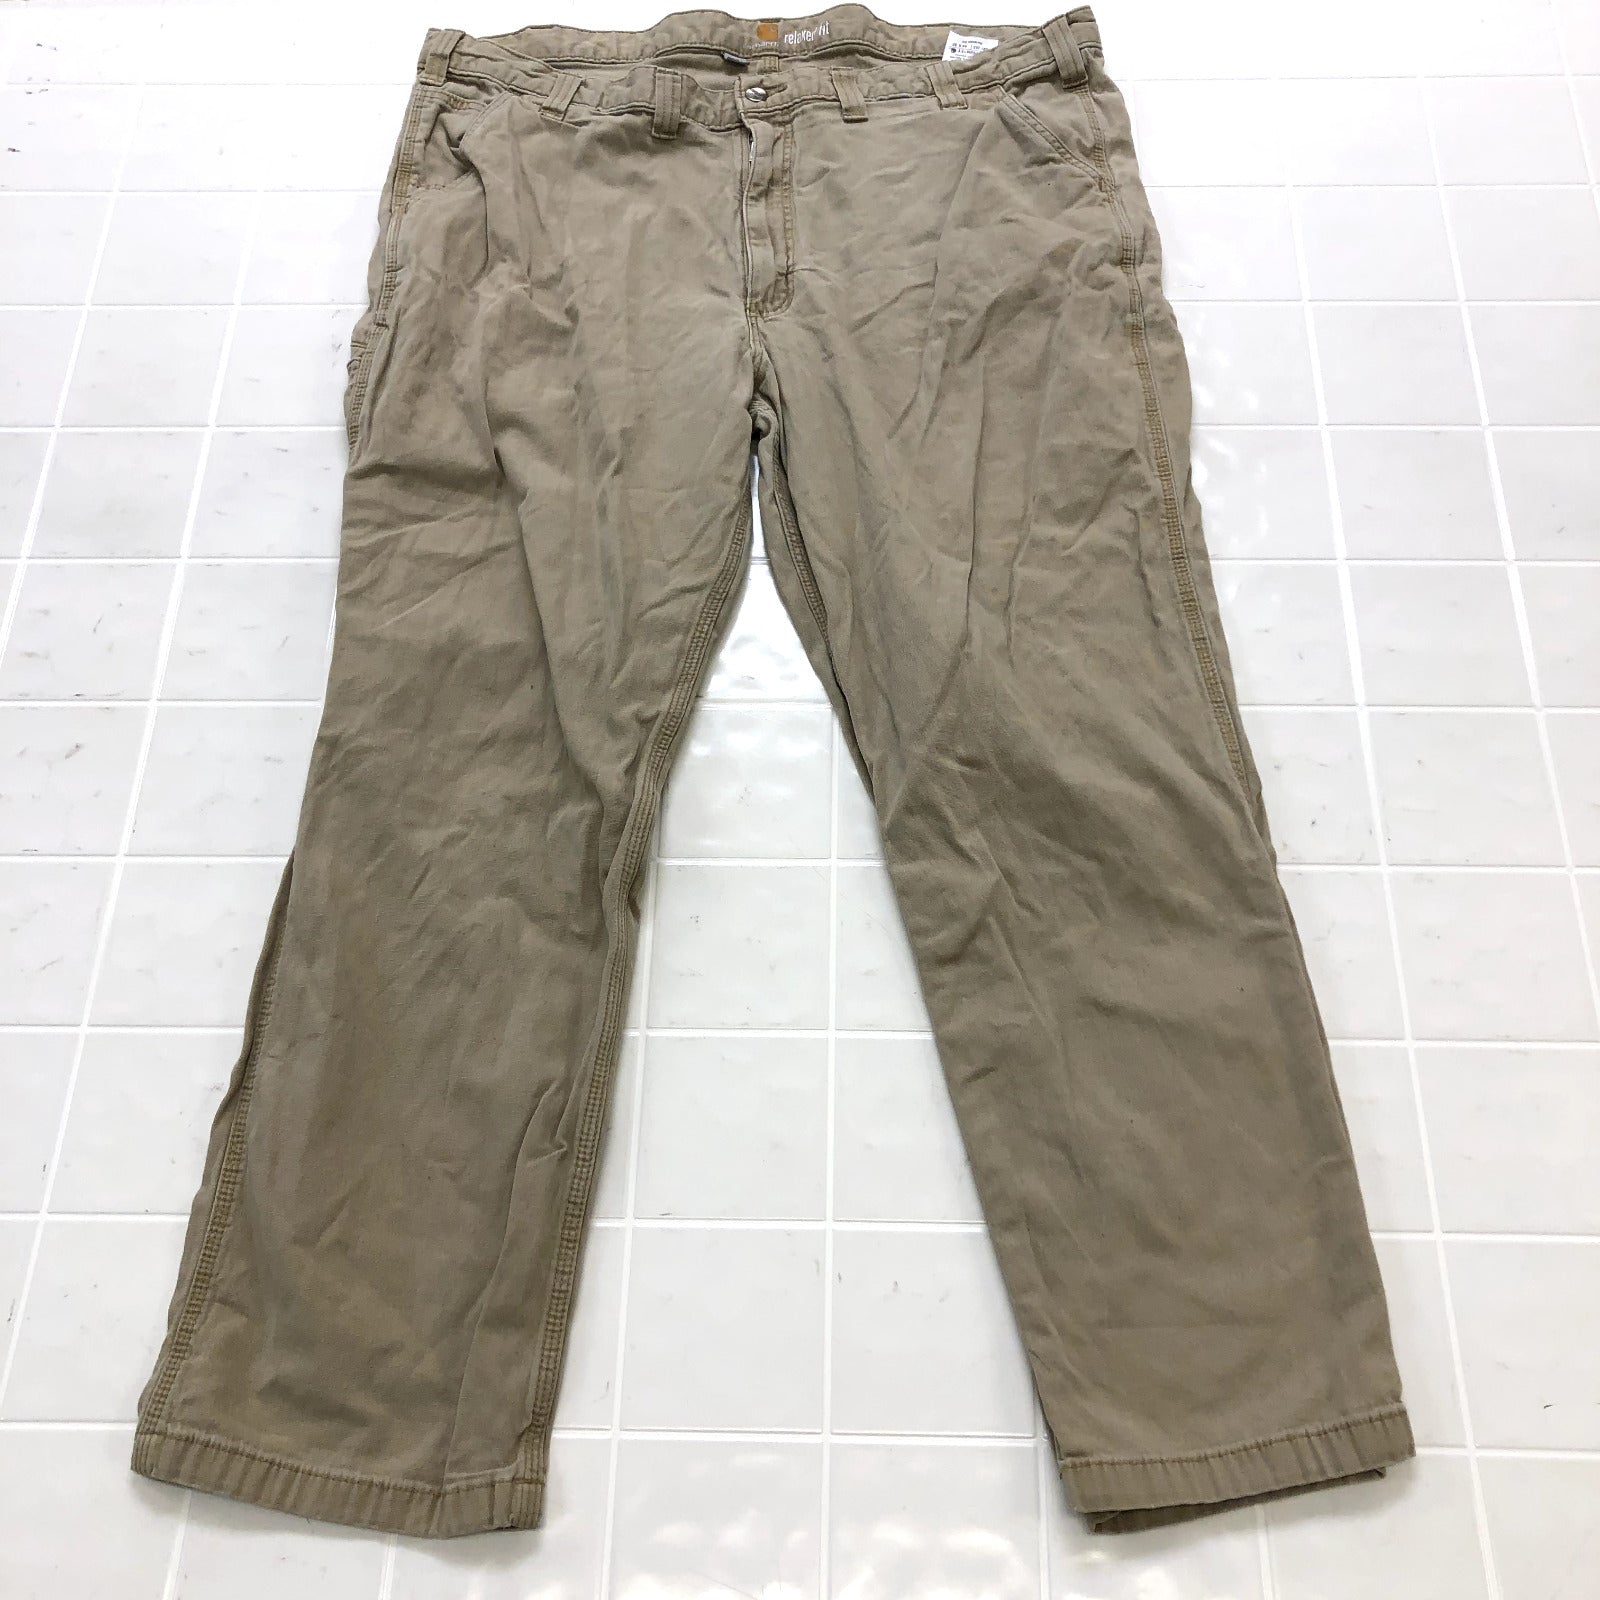 Carhartt Brown Flat Front Straight Cargo Regular Fit Pants Adult Size 44X32